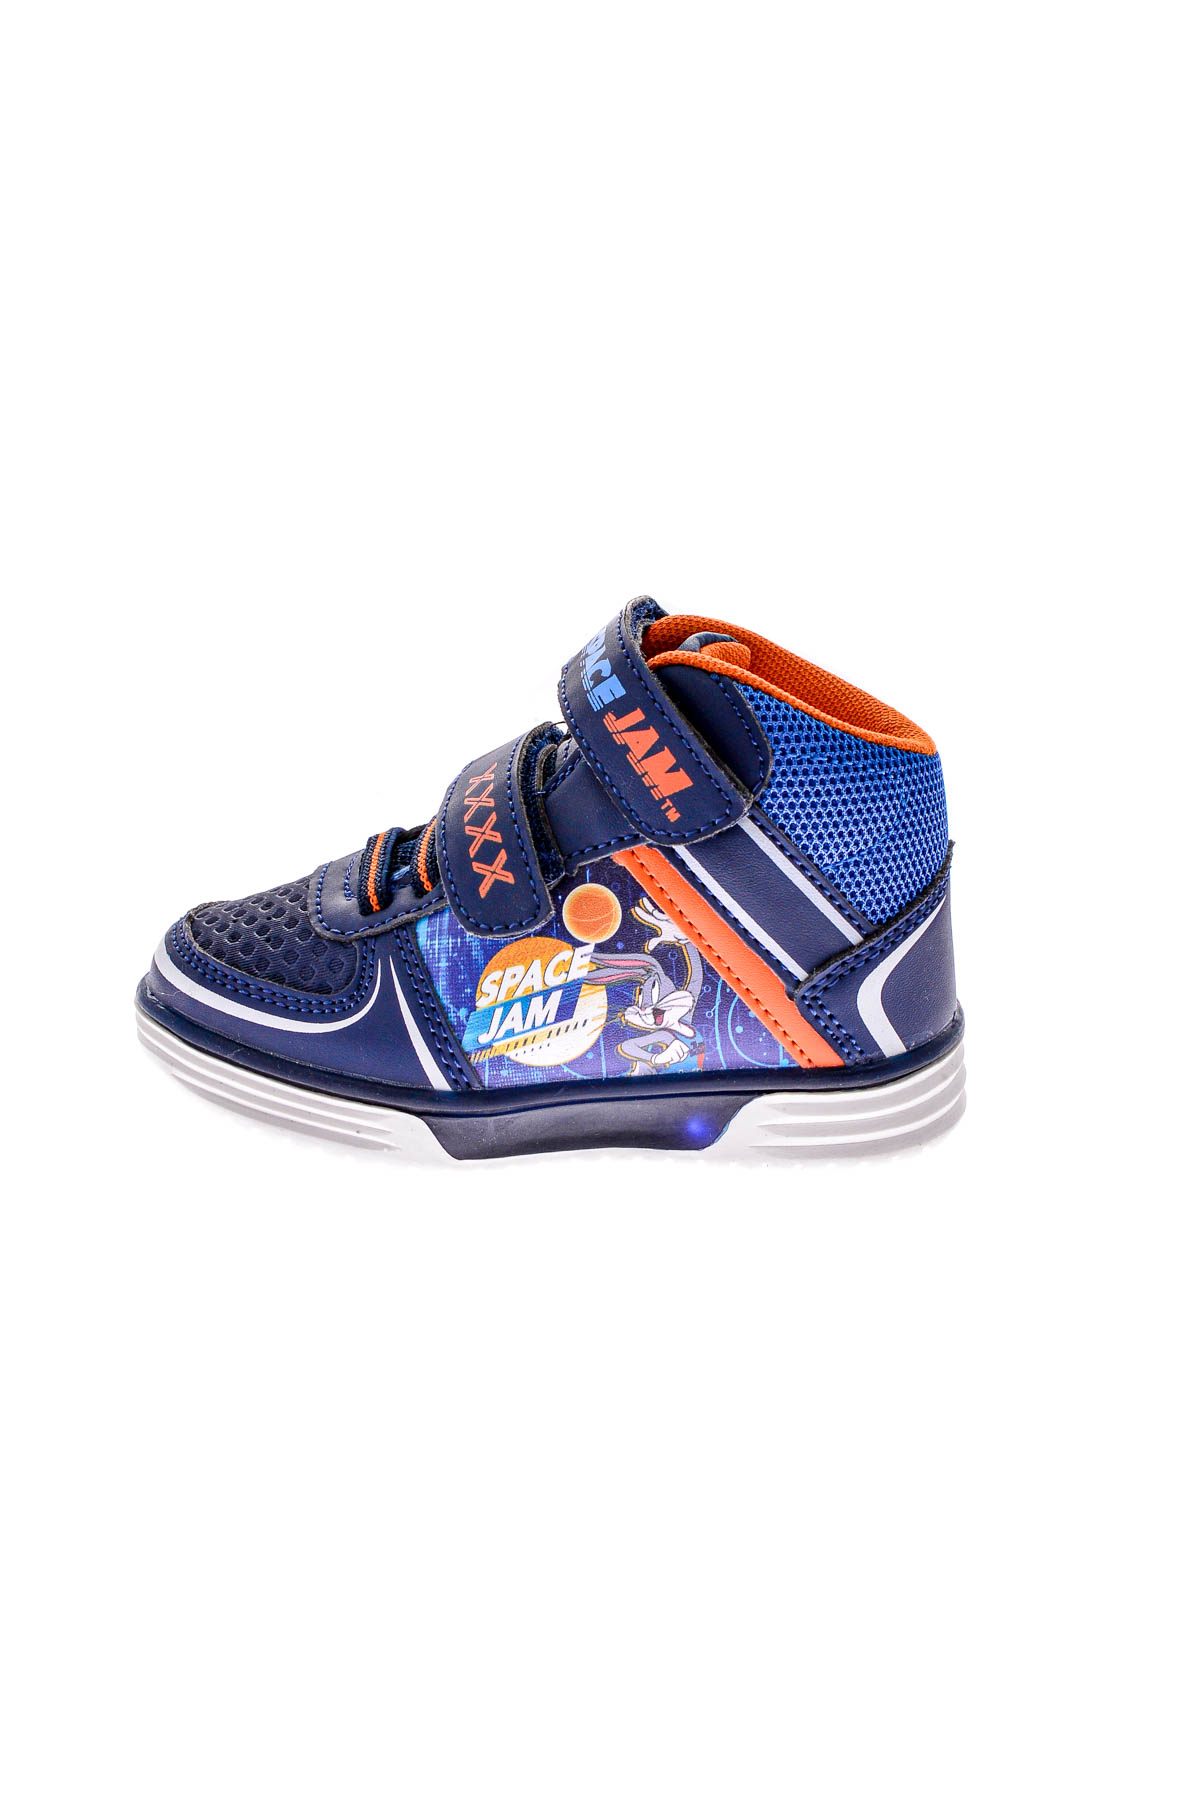 Kids' Shoes - SPACE JAM - 0